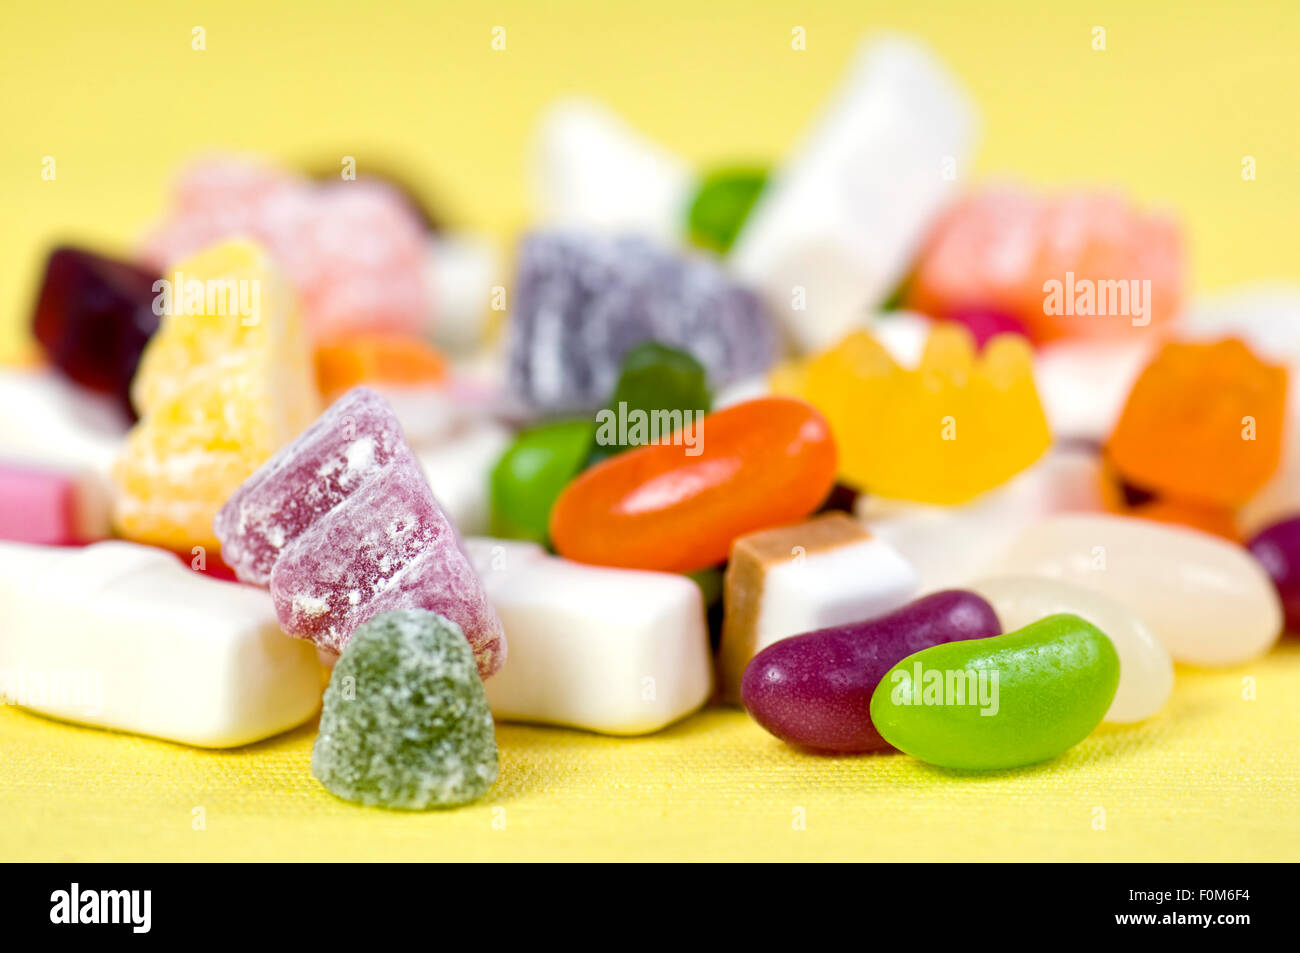 Mixture of childrens sweets including gummy bears, jelly beans, dolly mixtures, jelly babies and milk bottles Stock Photo